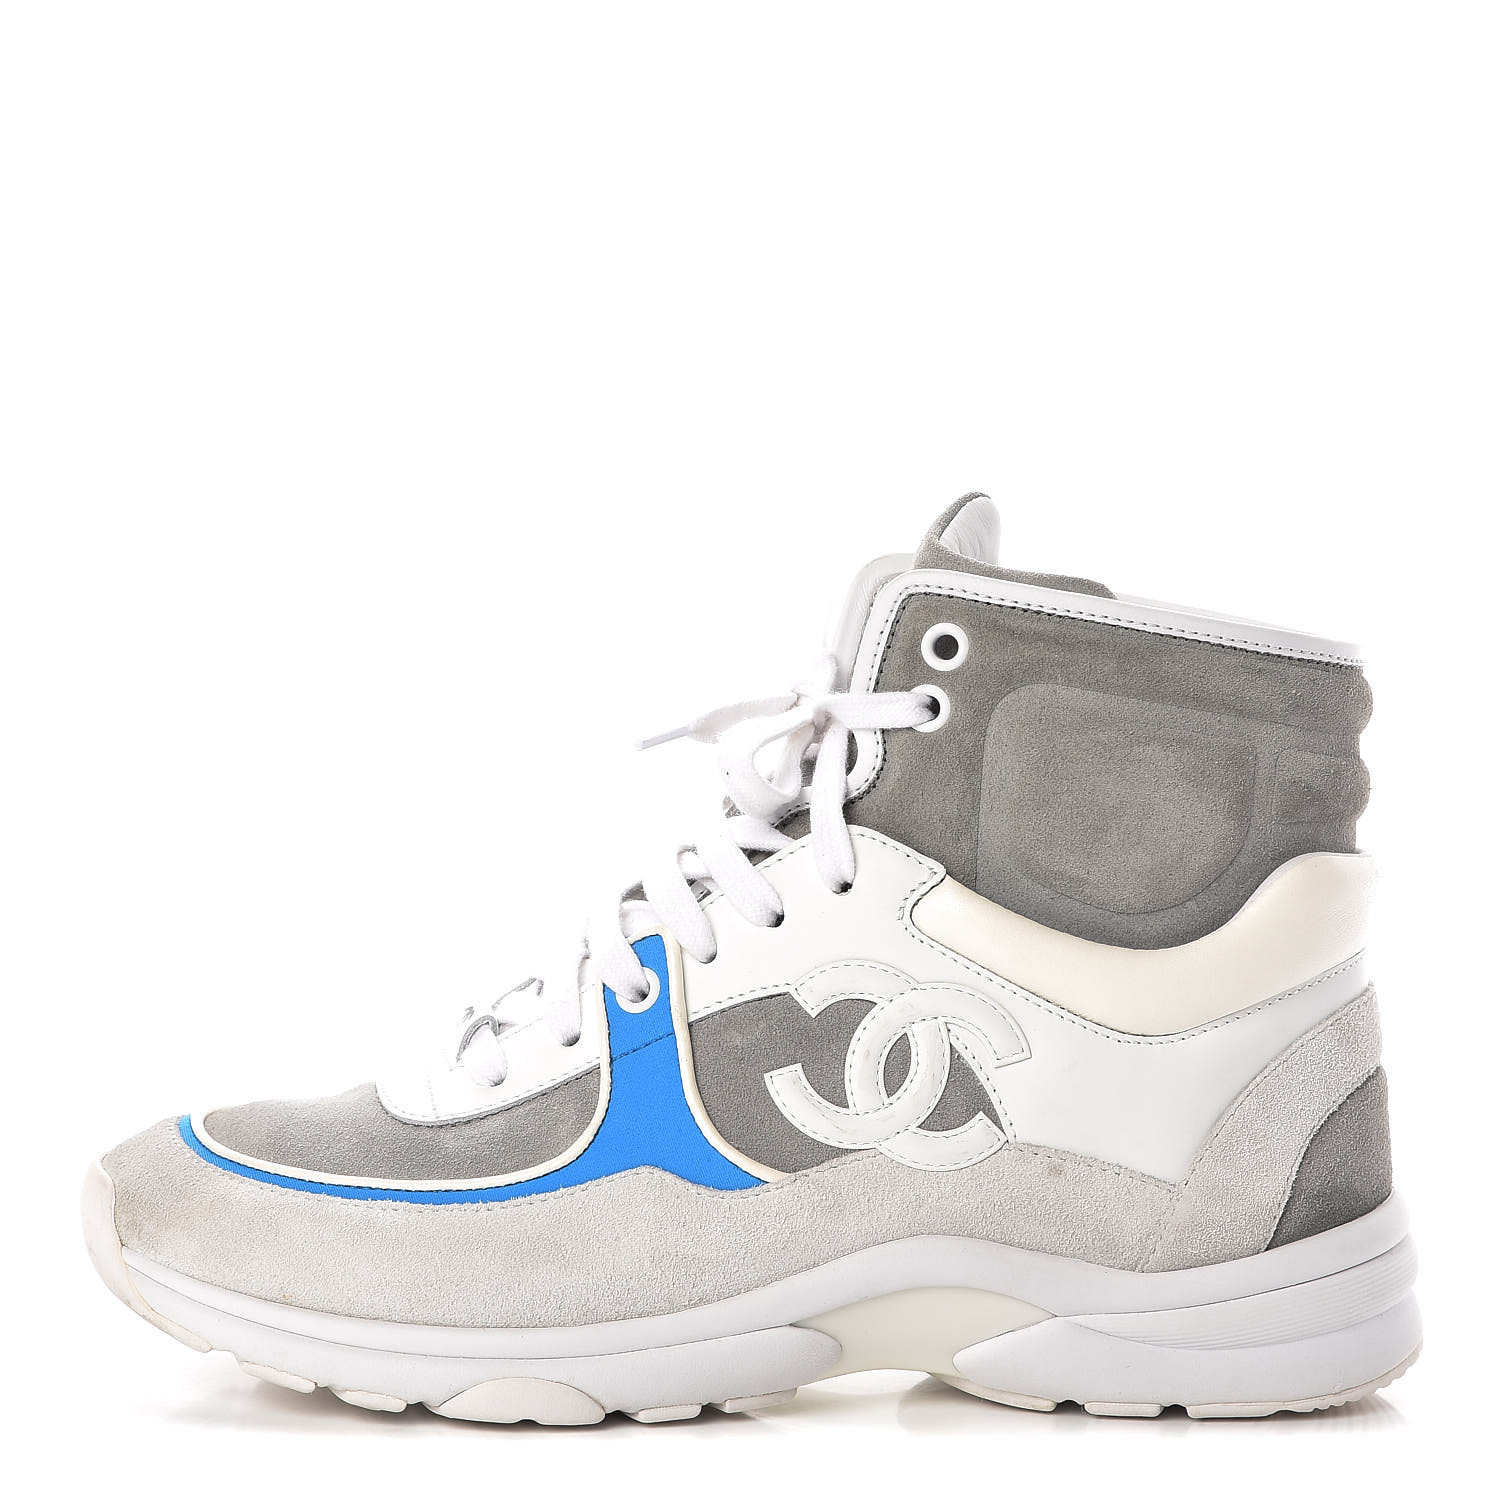 CC Sneakers 38 White Grey Fluo Blue 374942